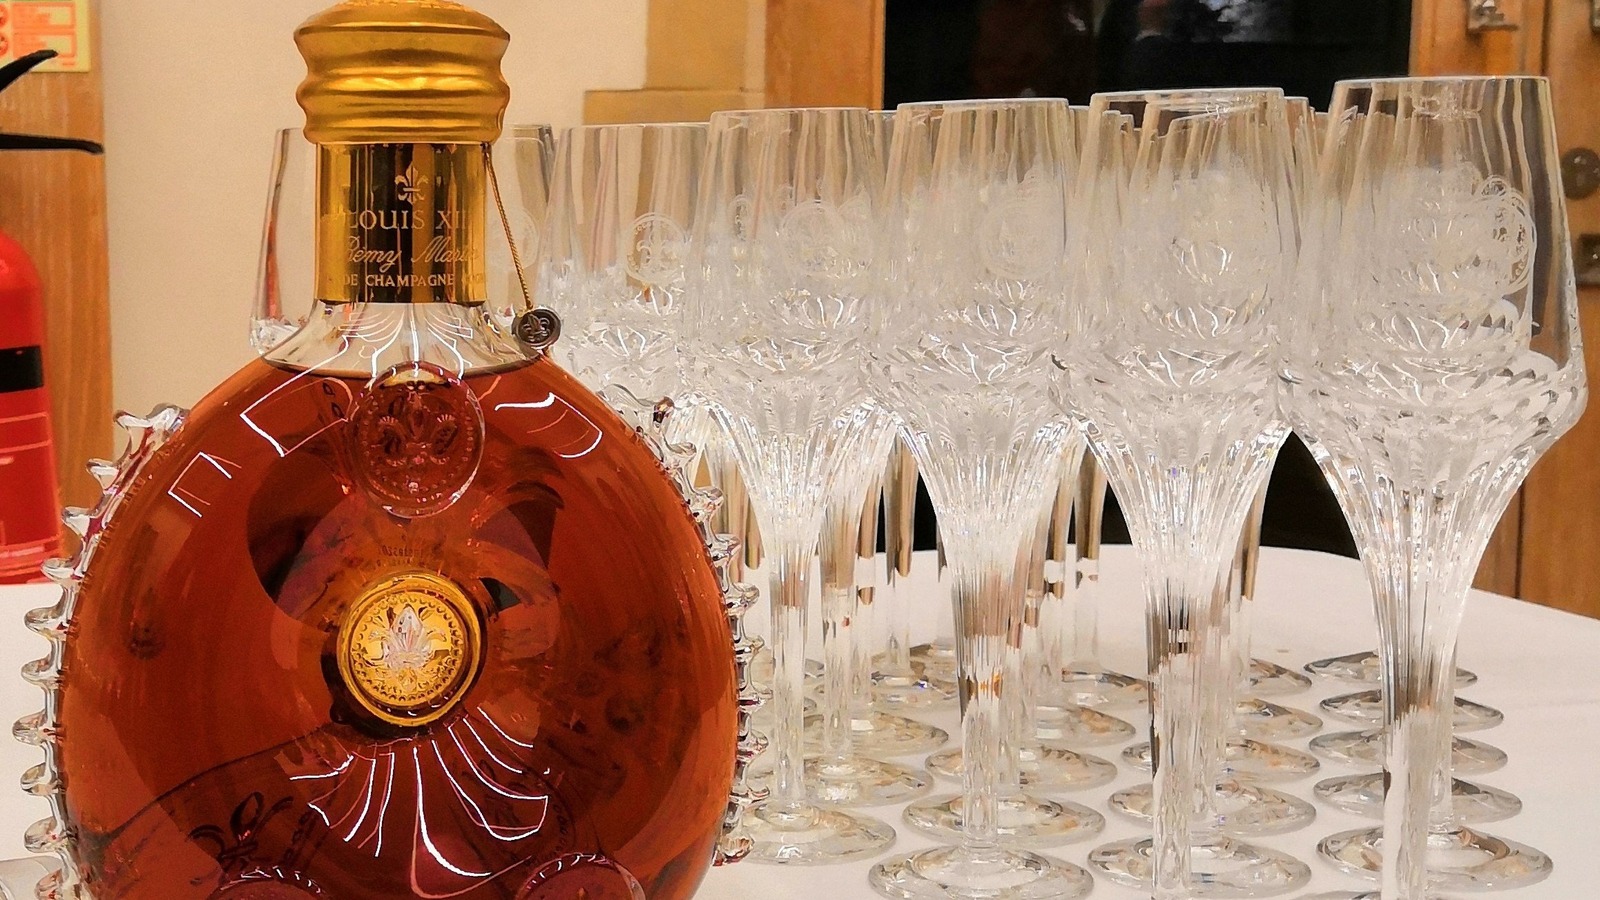 A bottle of $22,000 Cognac arrives at the Four Seasons - Los Angeles Times